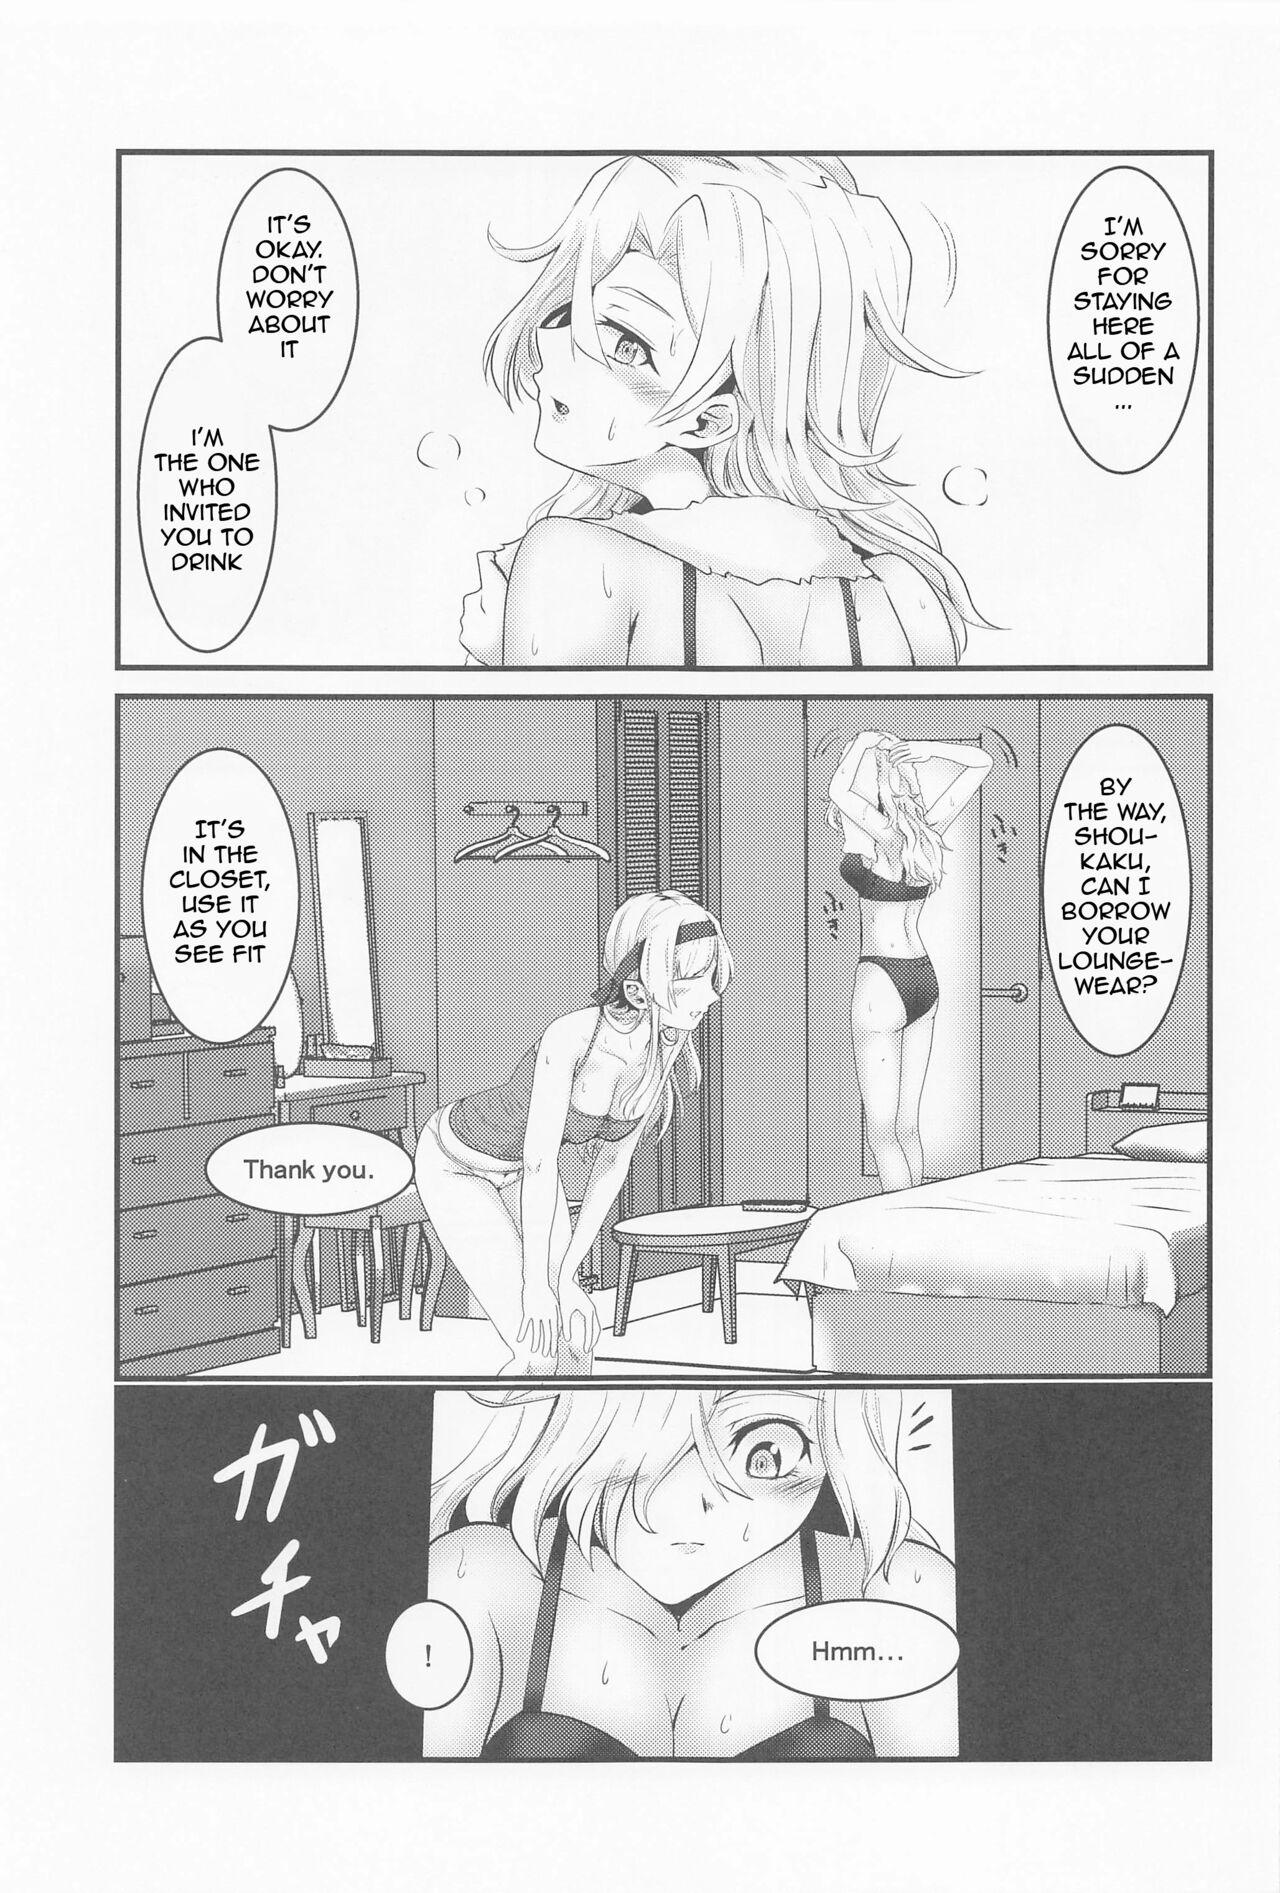 European Porn Covered by Honey... - Kantai collection Backshots - Page 4